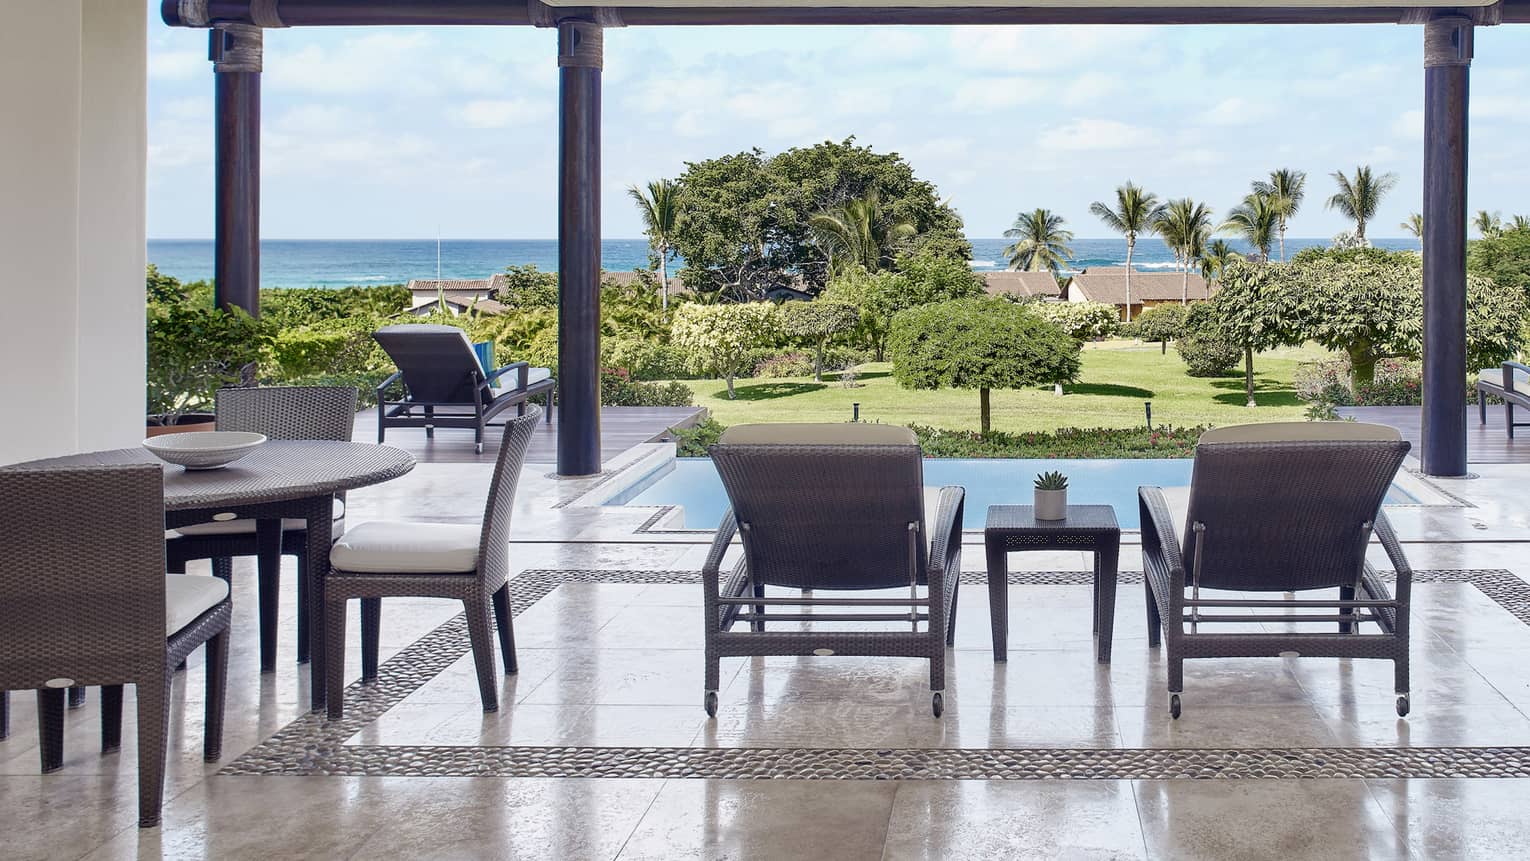 Terrace with dining table and lounge chairs, looking out to private pool and ocean in the distance